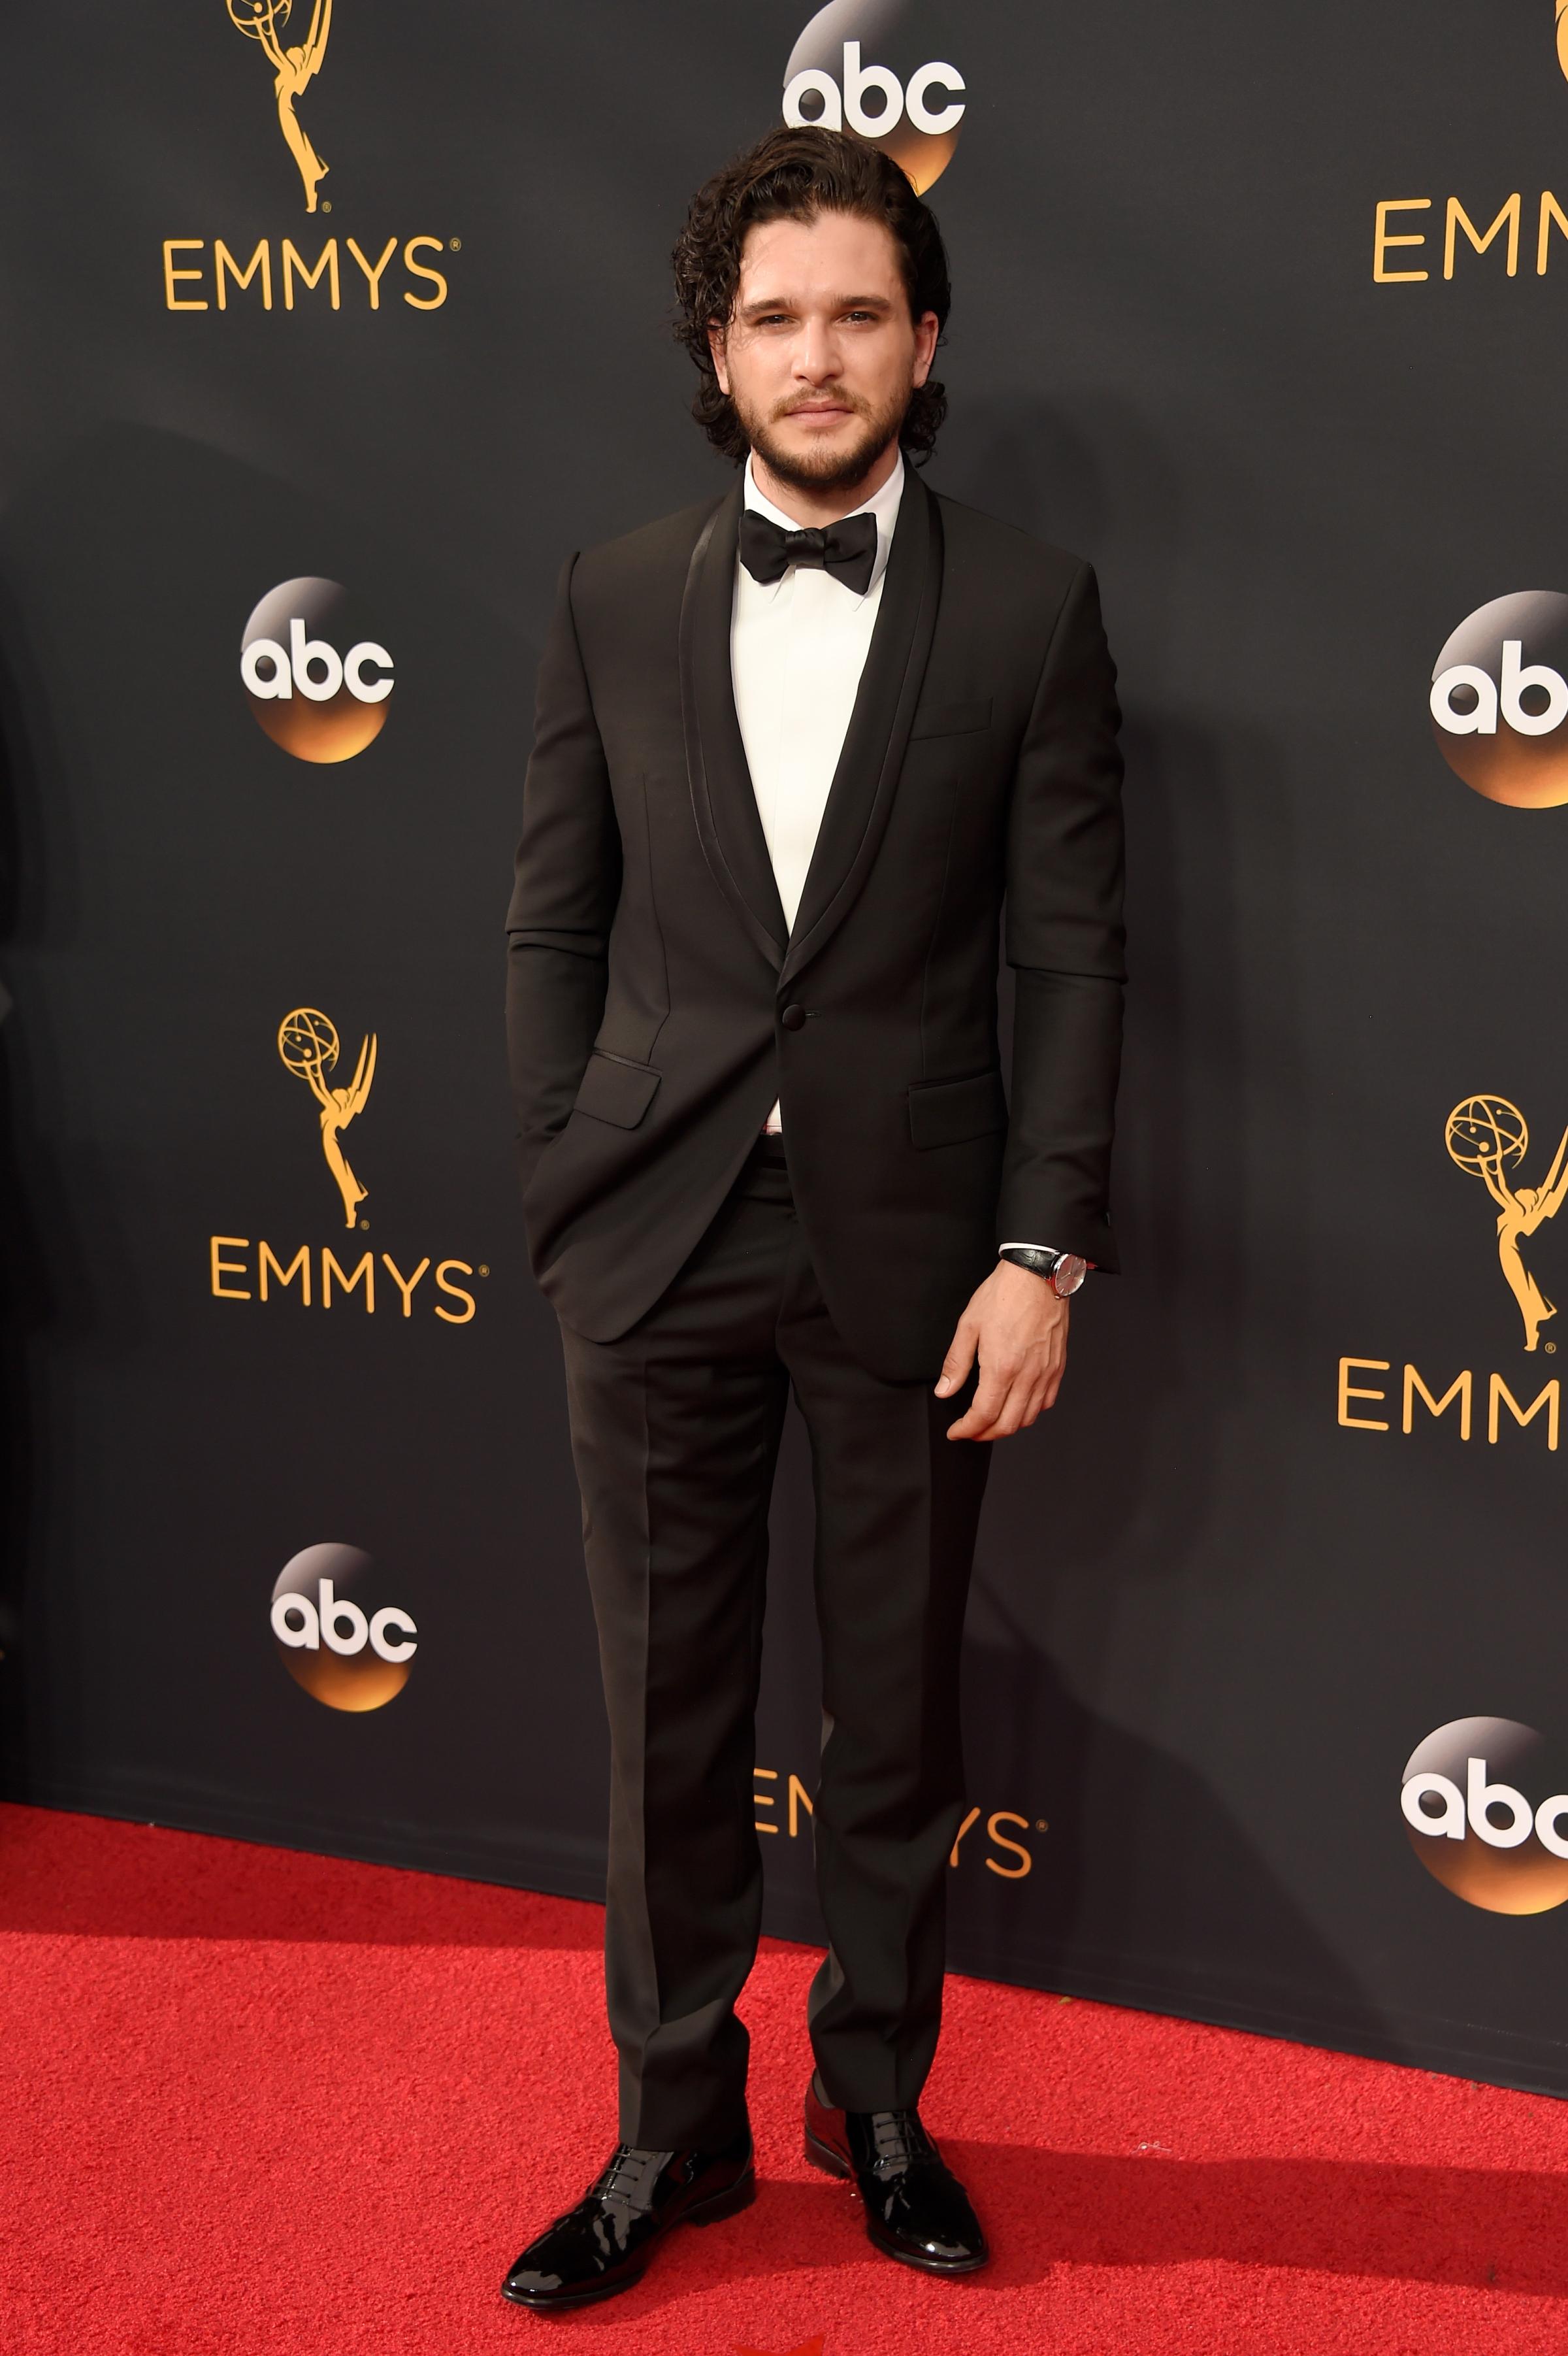 Kit Harrington arrives at the 68th Annual Primetime Emmy Awards at Microsoft Theater on September 18, 2016 in Los Angeles.